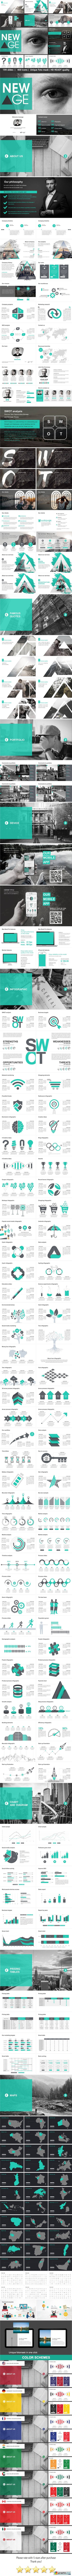 New Age Creative Powerpoint Template